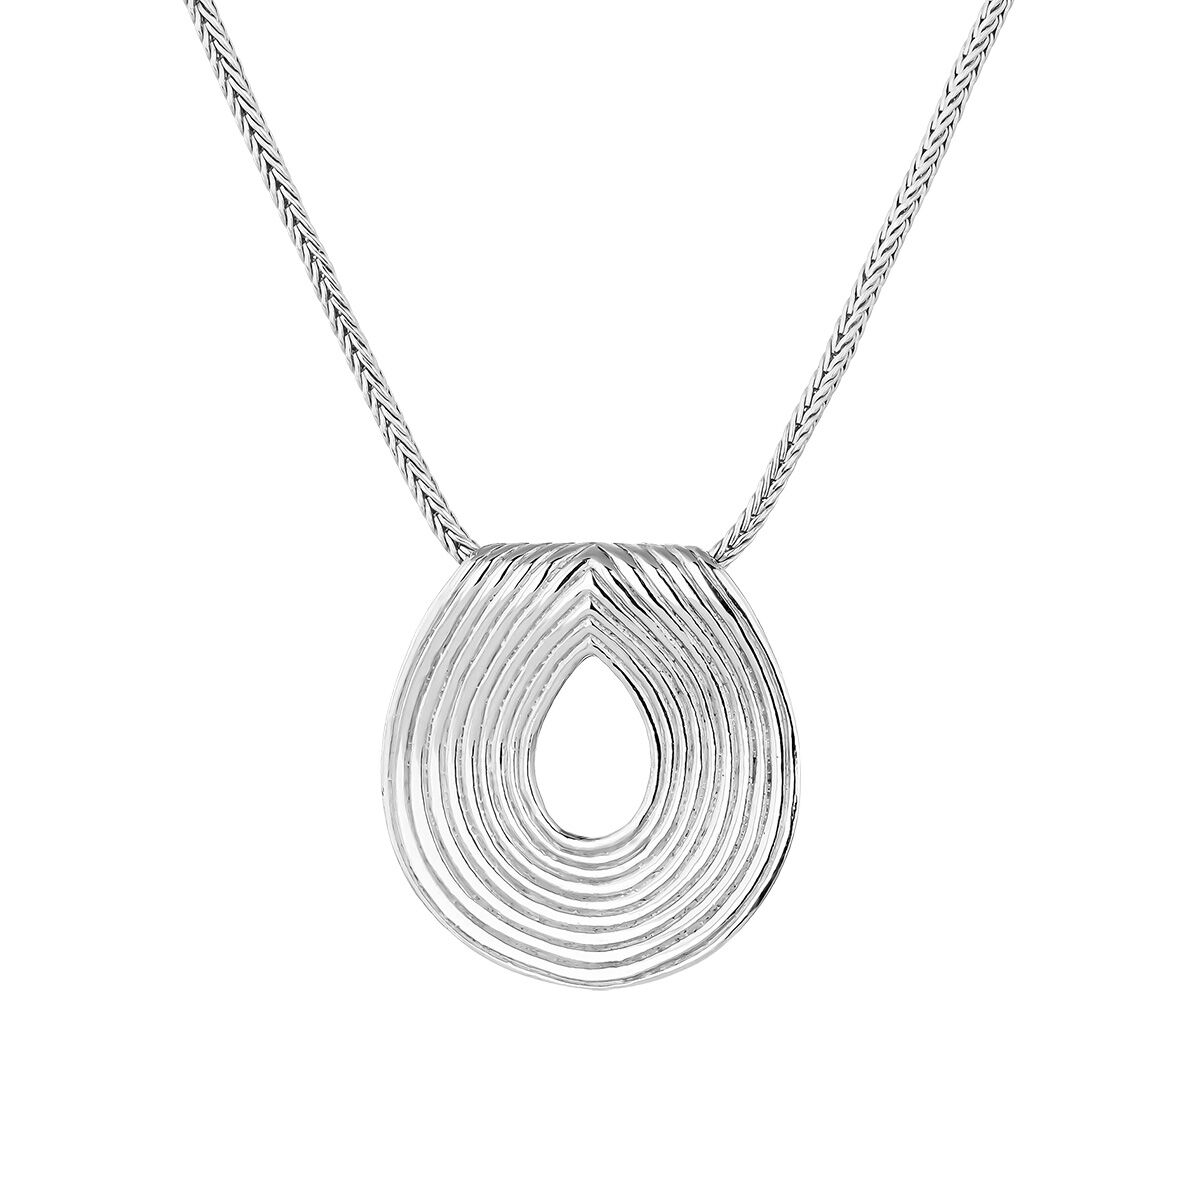 Oval silver pendant with raised detail, J05212-01, hi-res